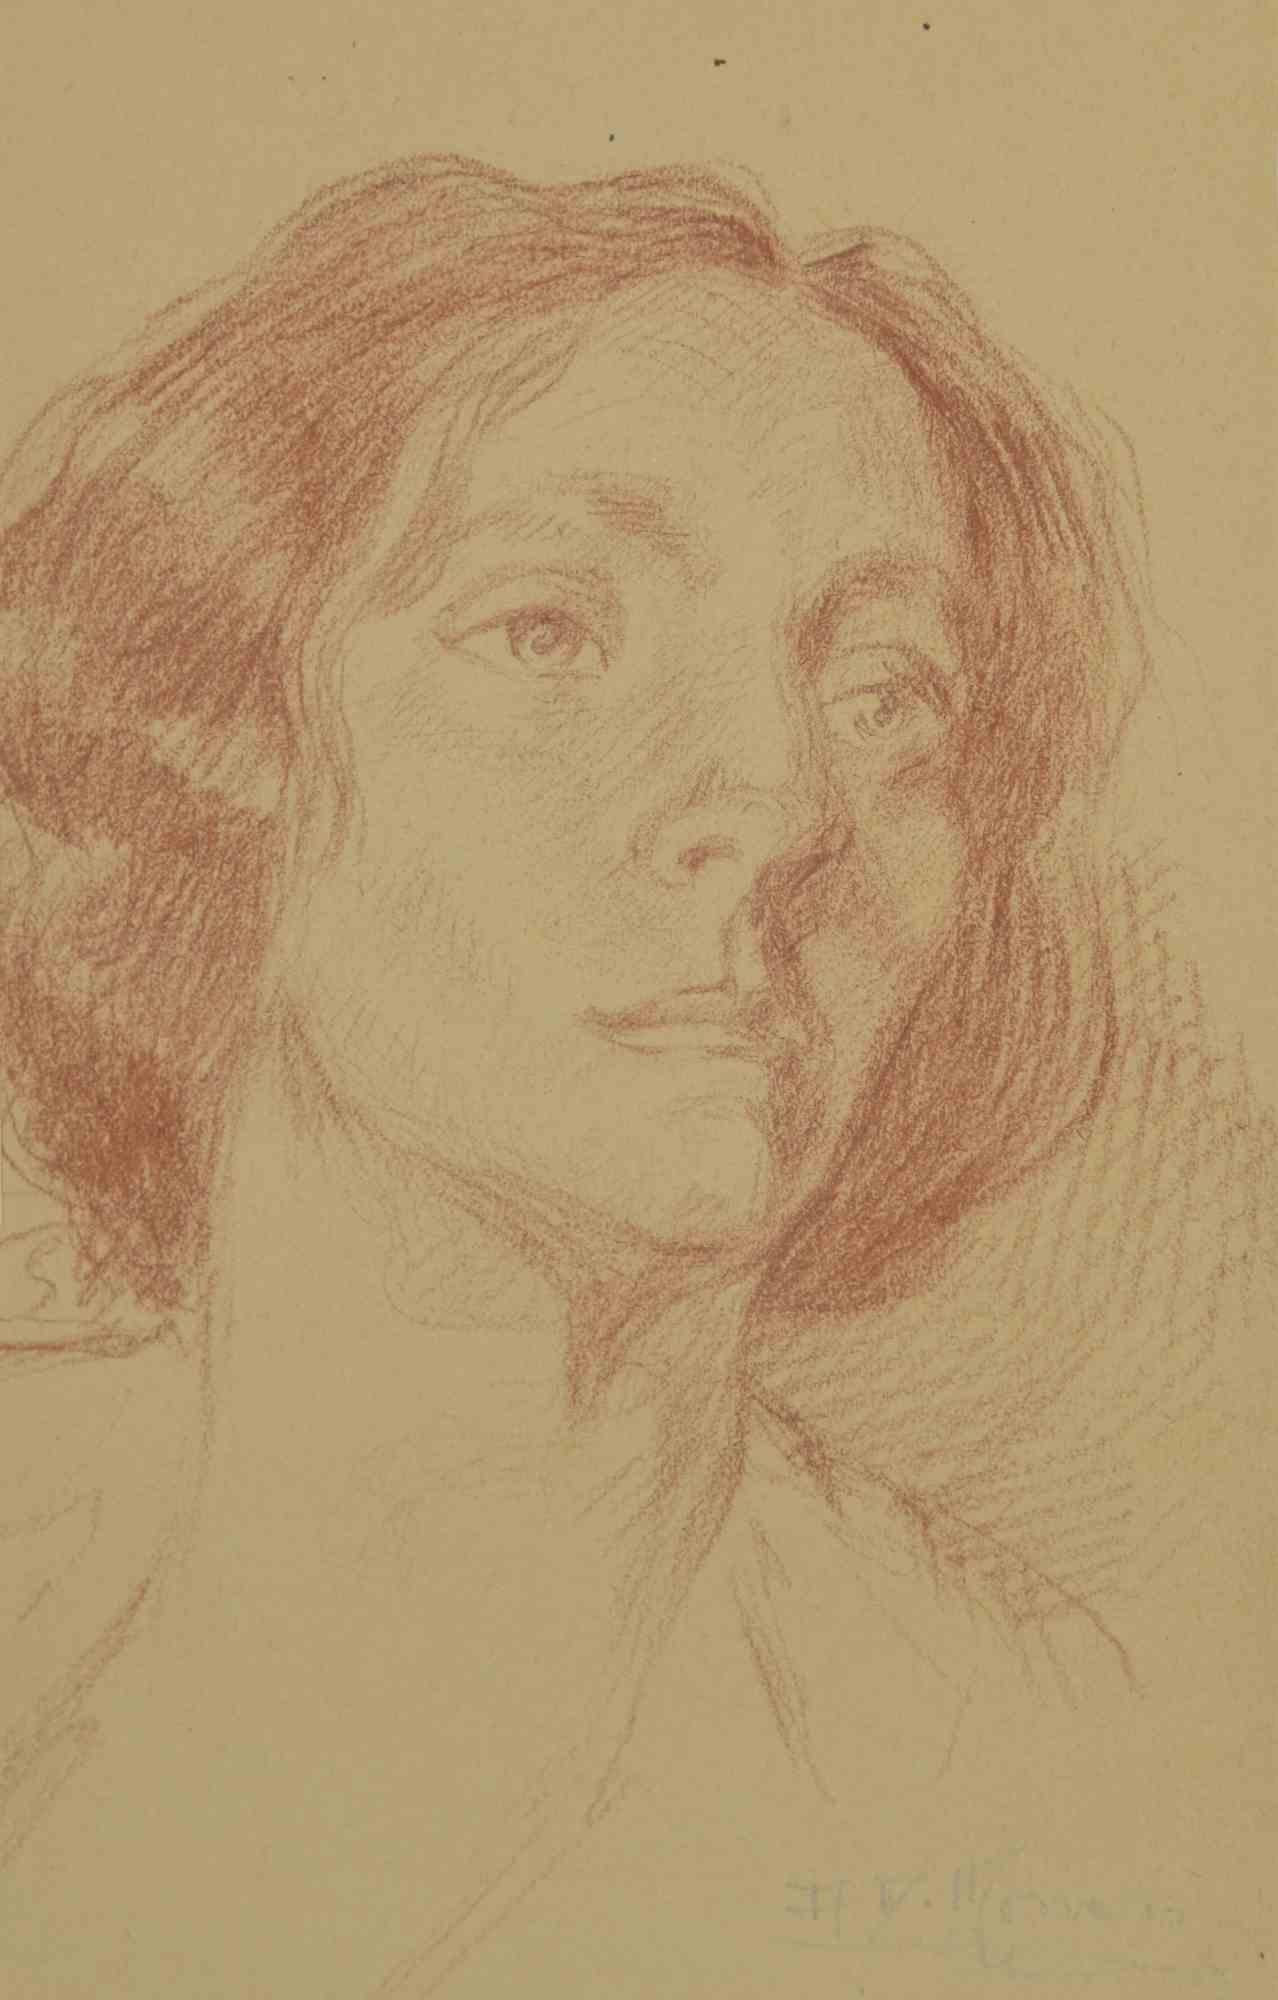 Portrait is a Drawing in pencil realized by Augusto Monari in the Early-20th Century.

Hand-signed on the lower.

Good conditions, including a creamy-colored Passepartout.

The artwork is depicted through confident strokes in a well-balanced